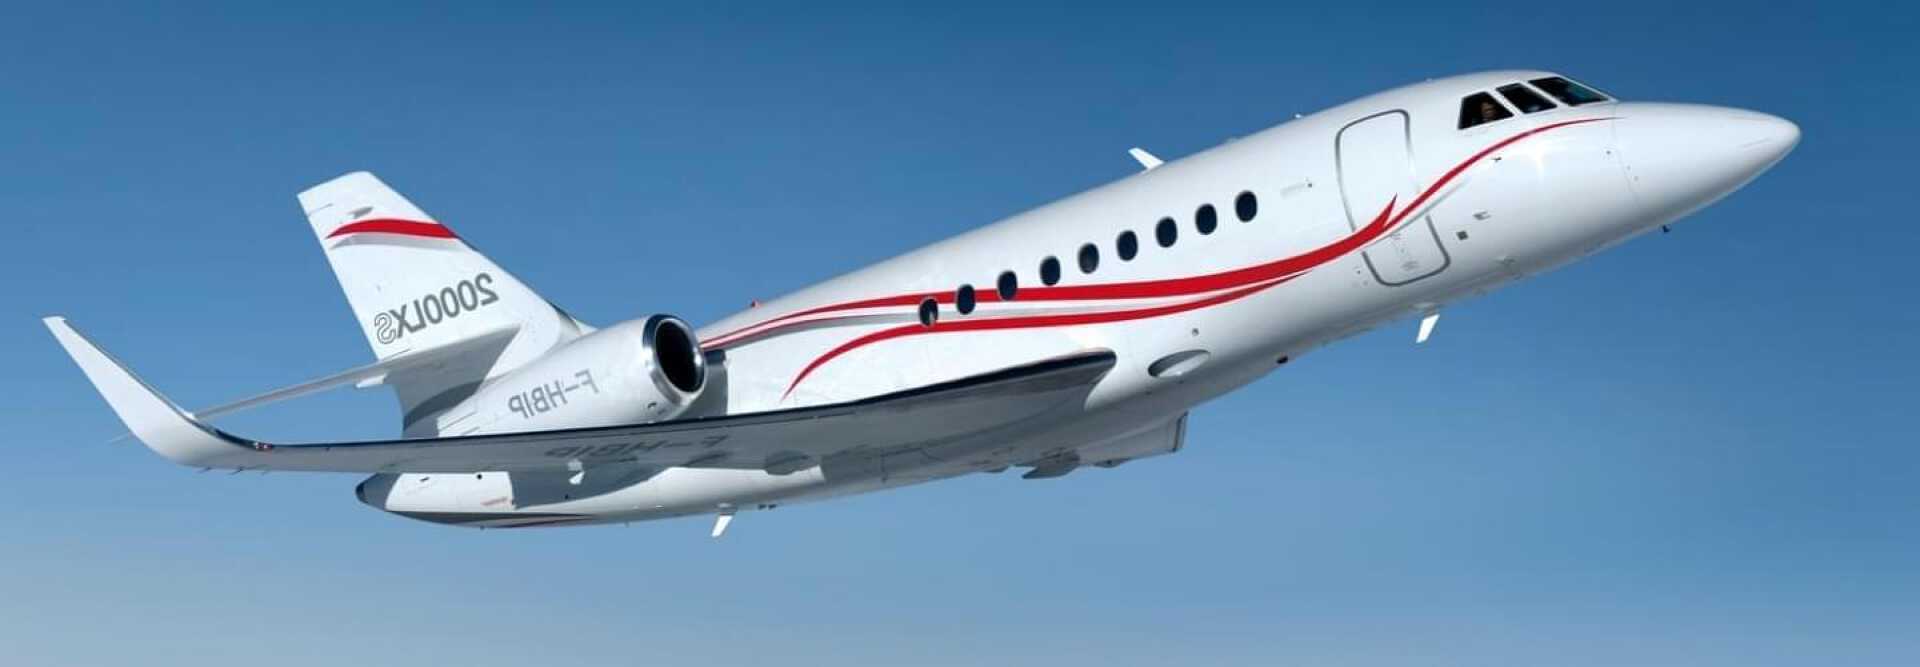 Dassault Falcon 2000LXS available for hire